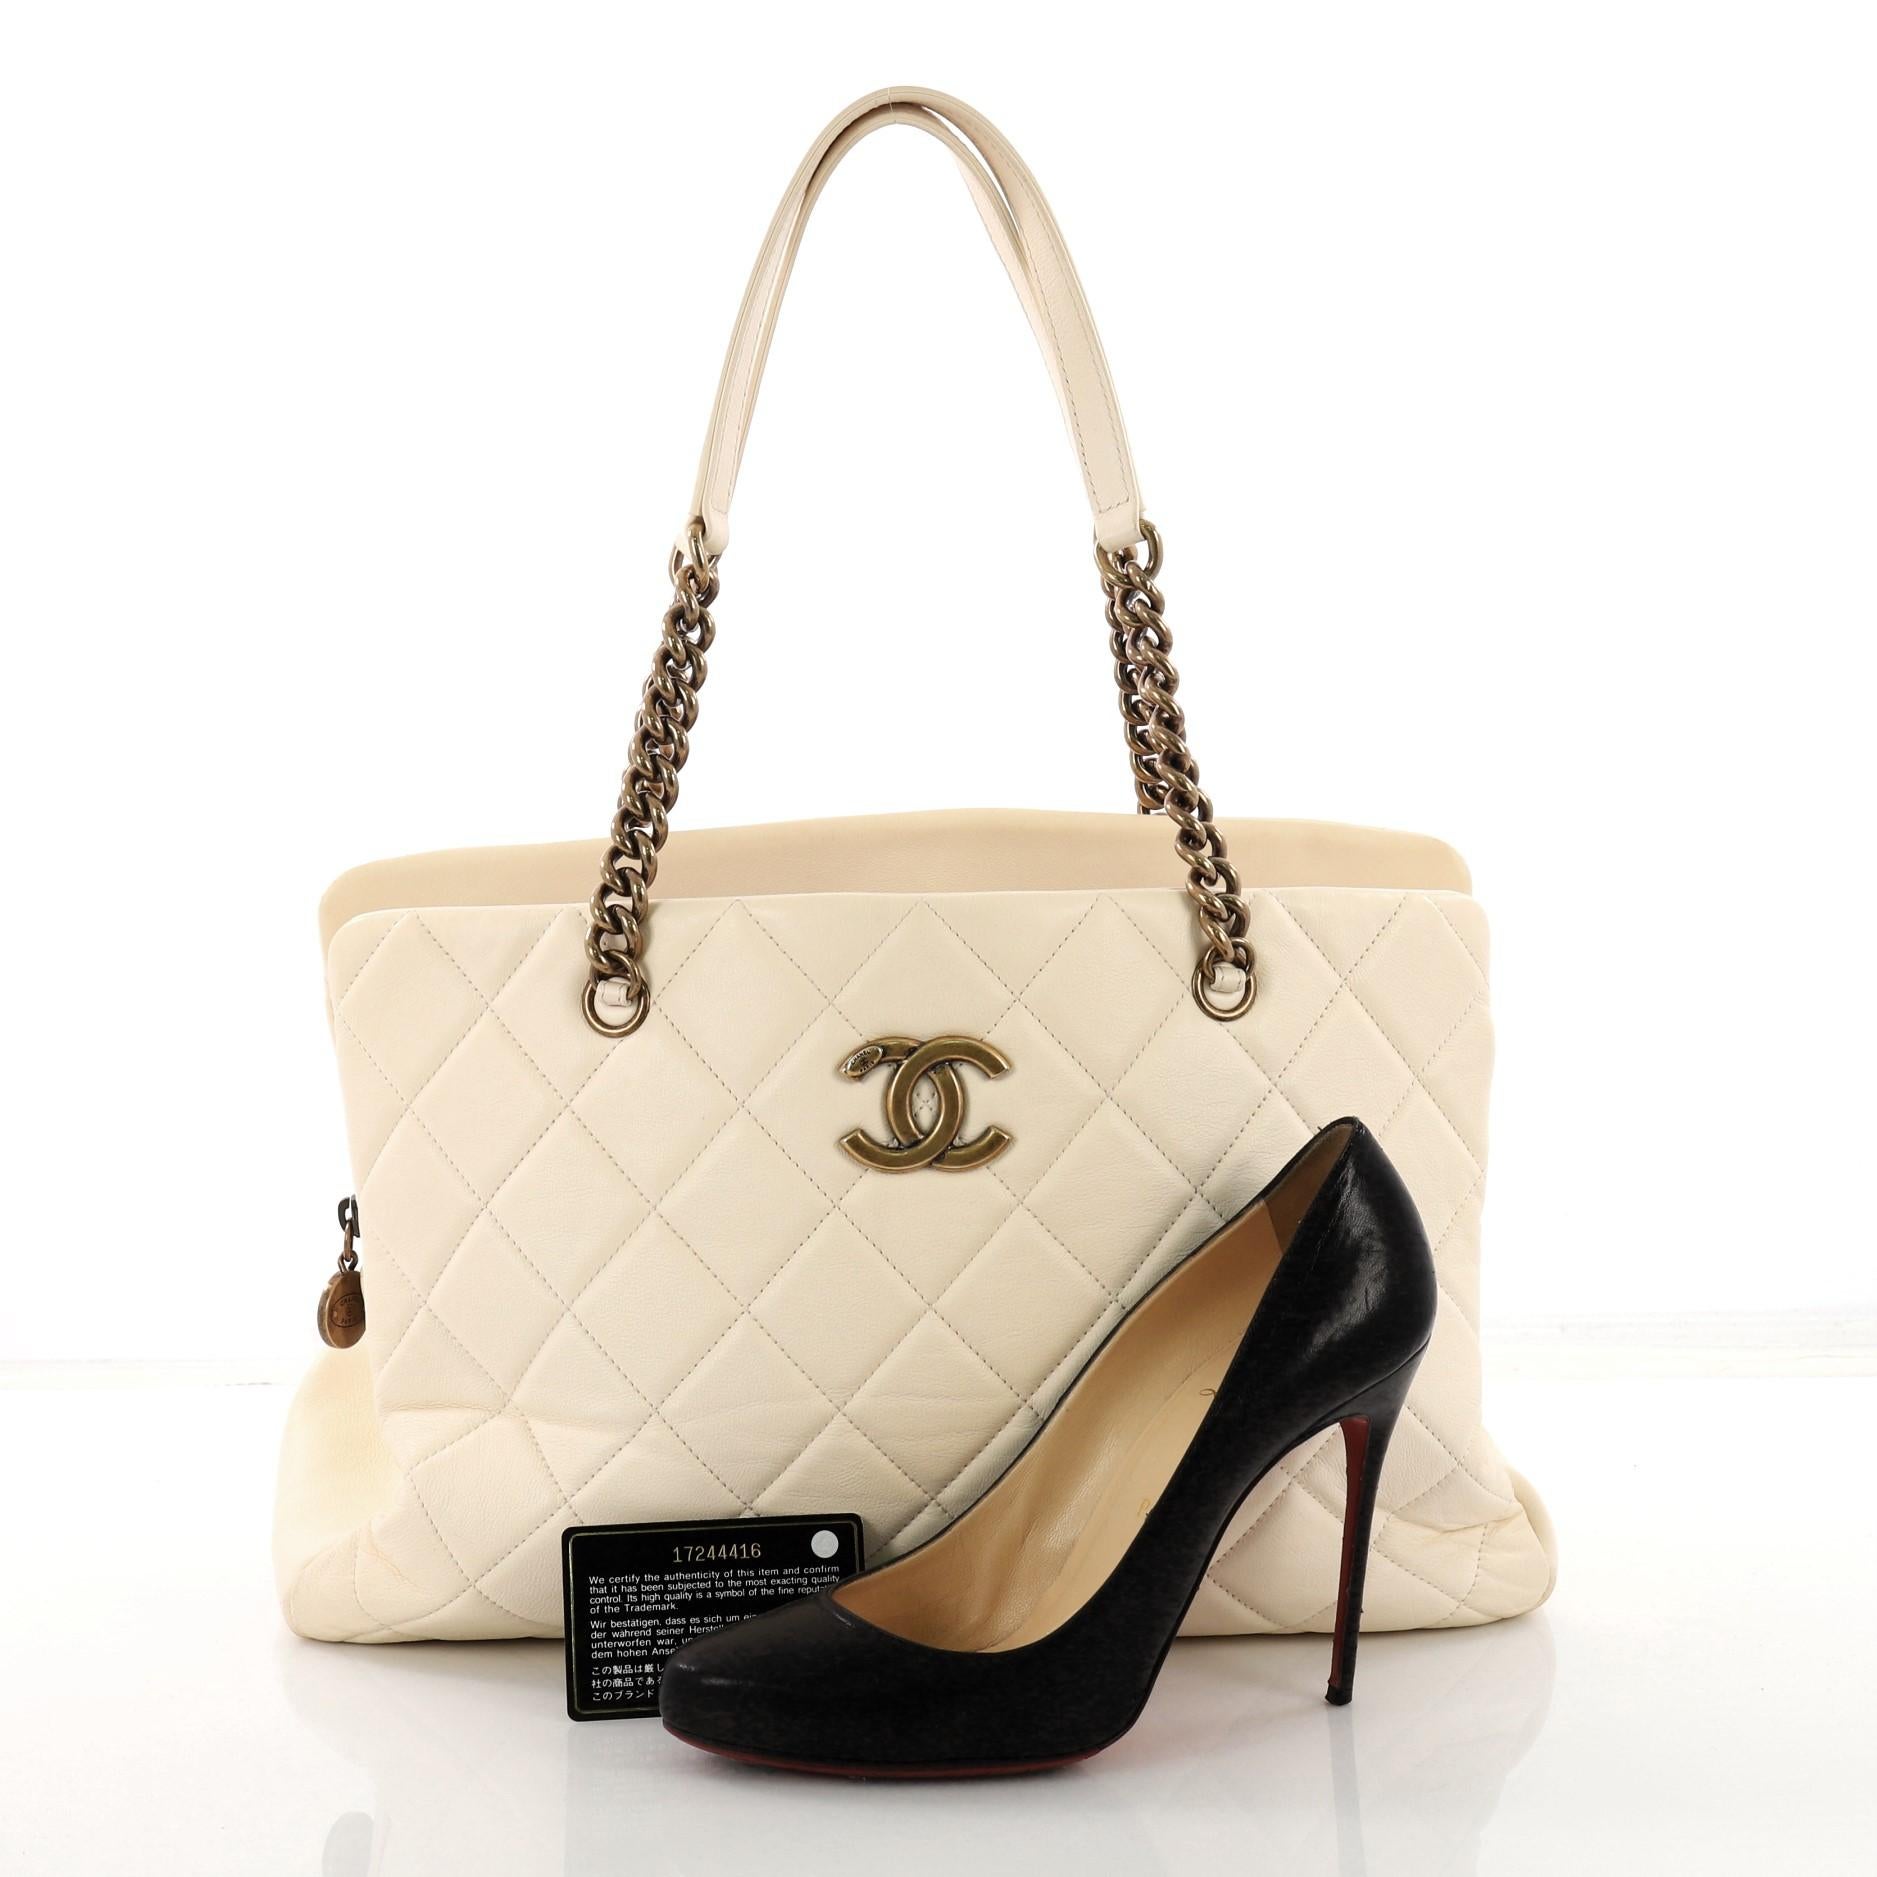 This Chanel CC Crown Tote Quilted Leather Large, crafted in beige quilted leather, features chain straps with leather pads, protective base studs and aged gold-tone hardware. It opens to a beige fabric interior divided into two open compartments and